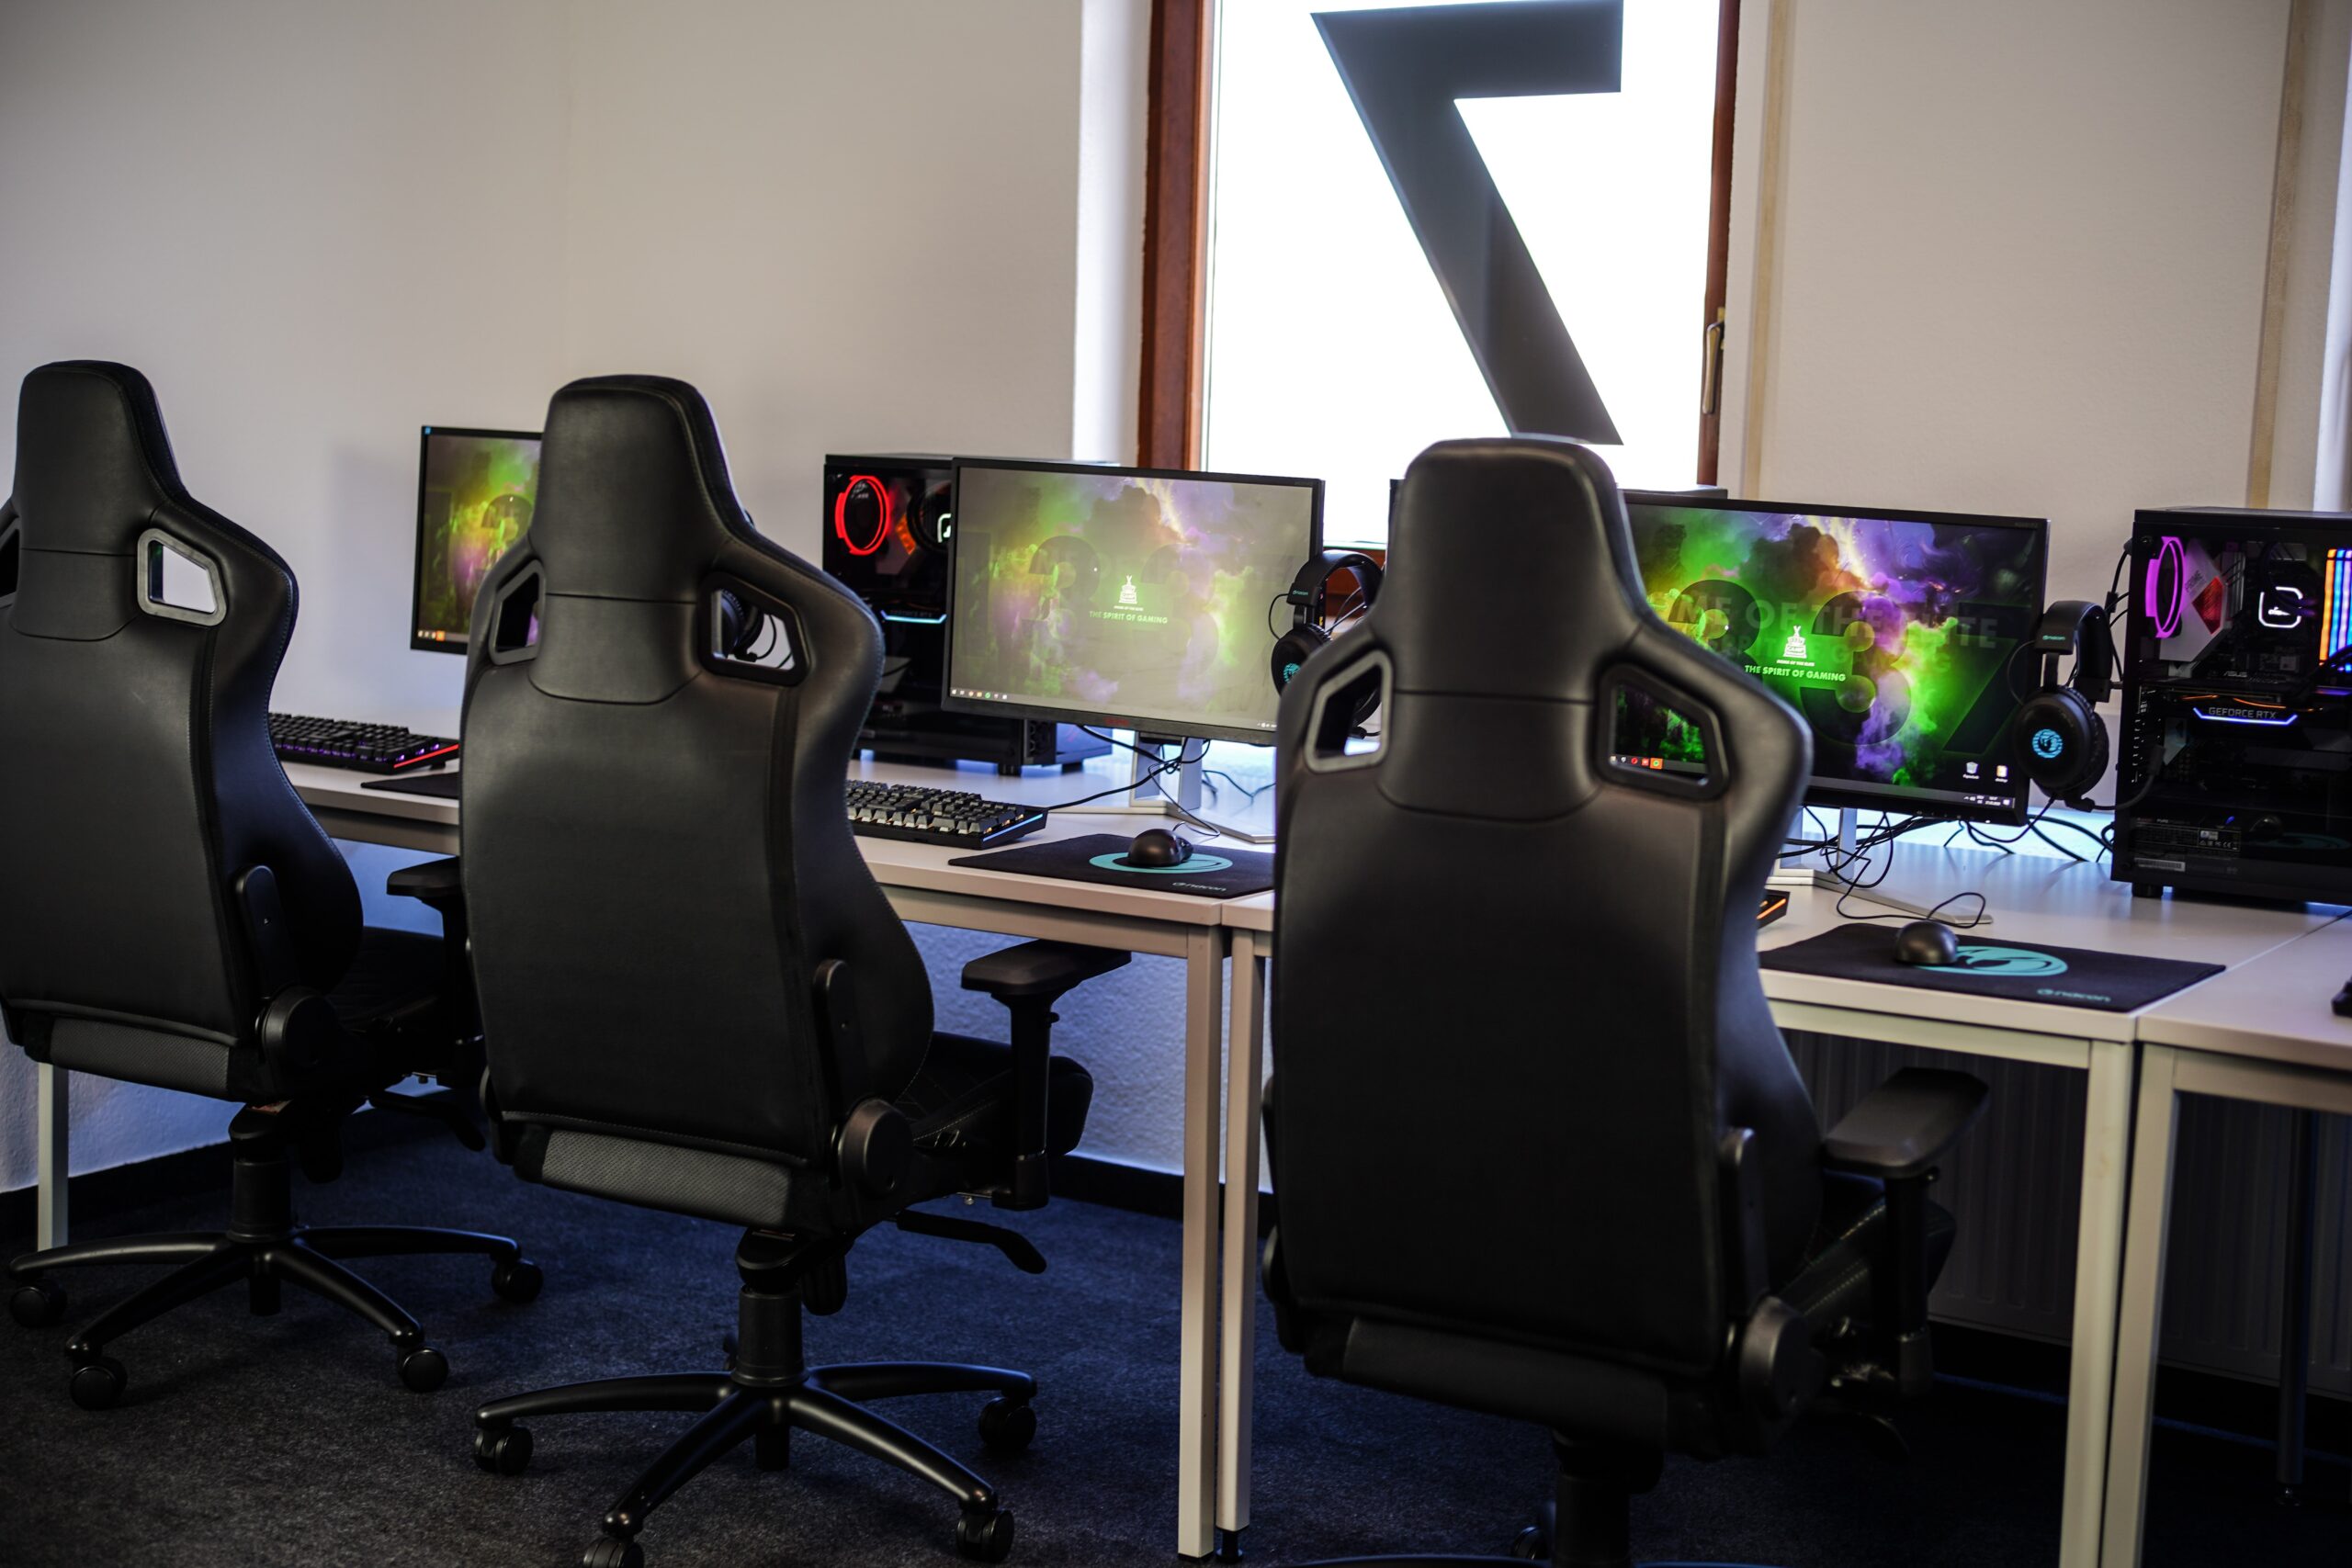 Gaming chairs vs office chairs: which seat type is best?